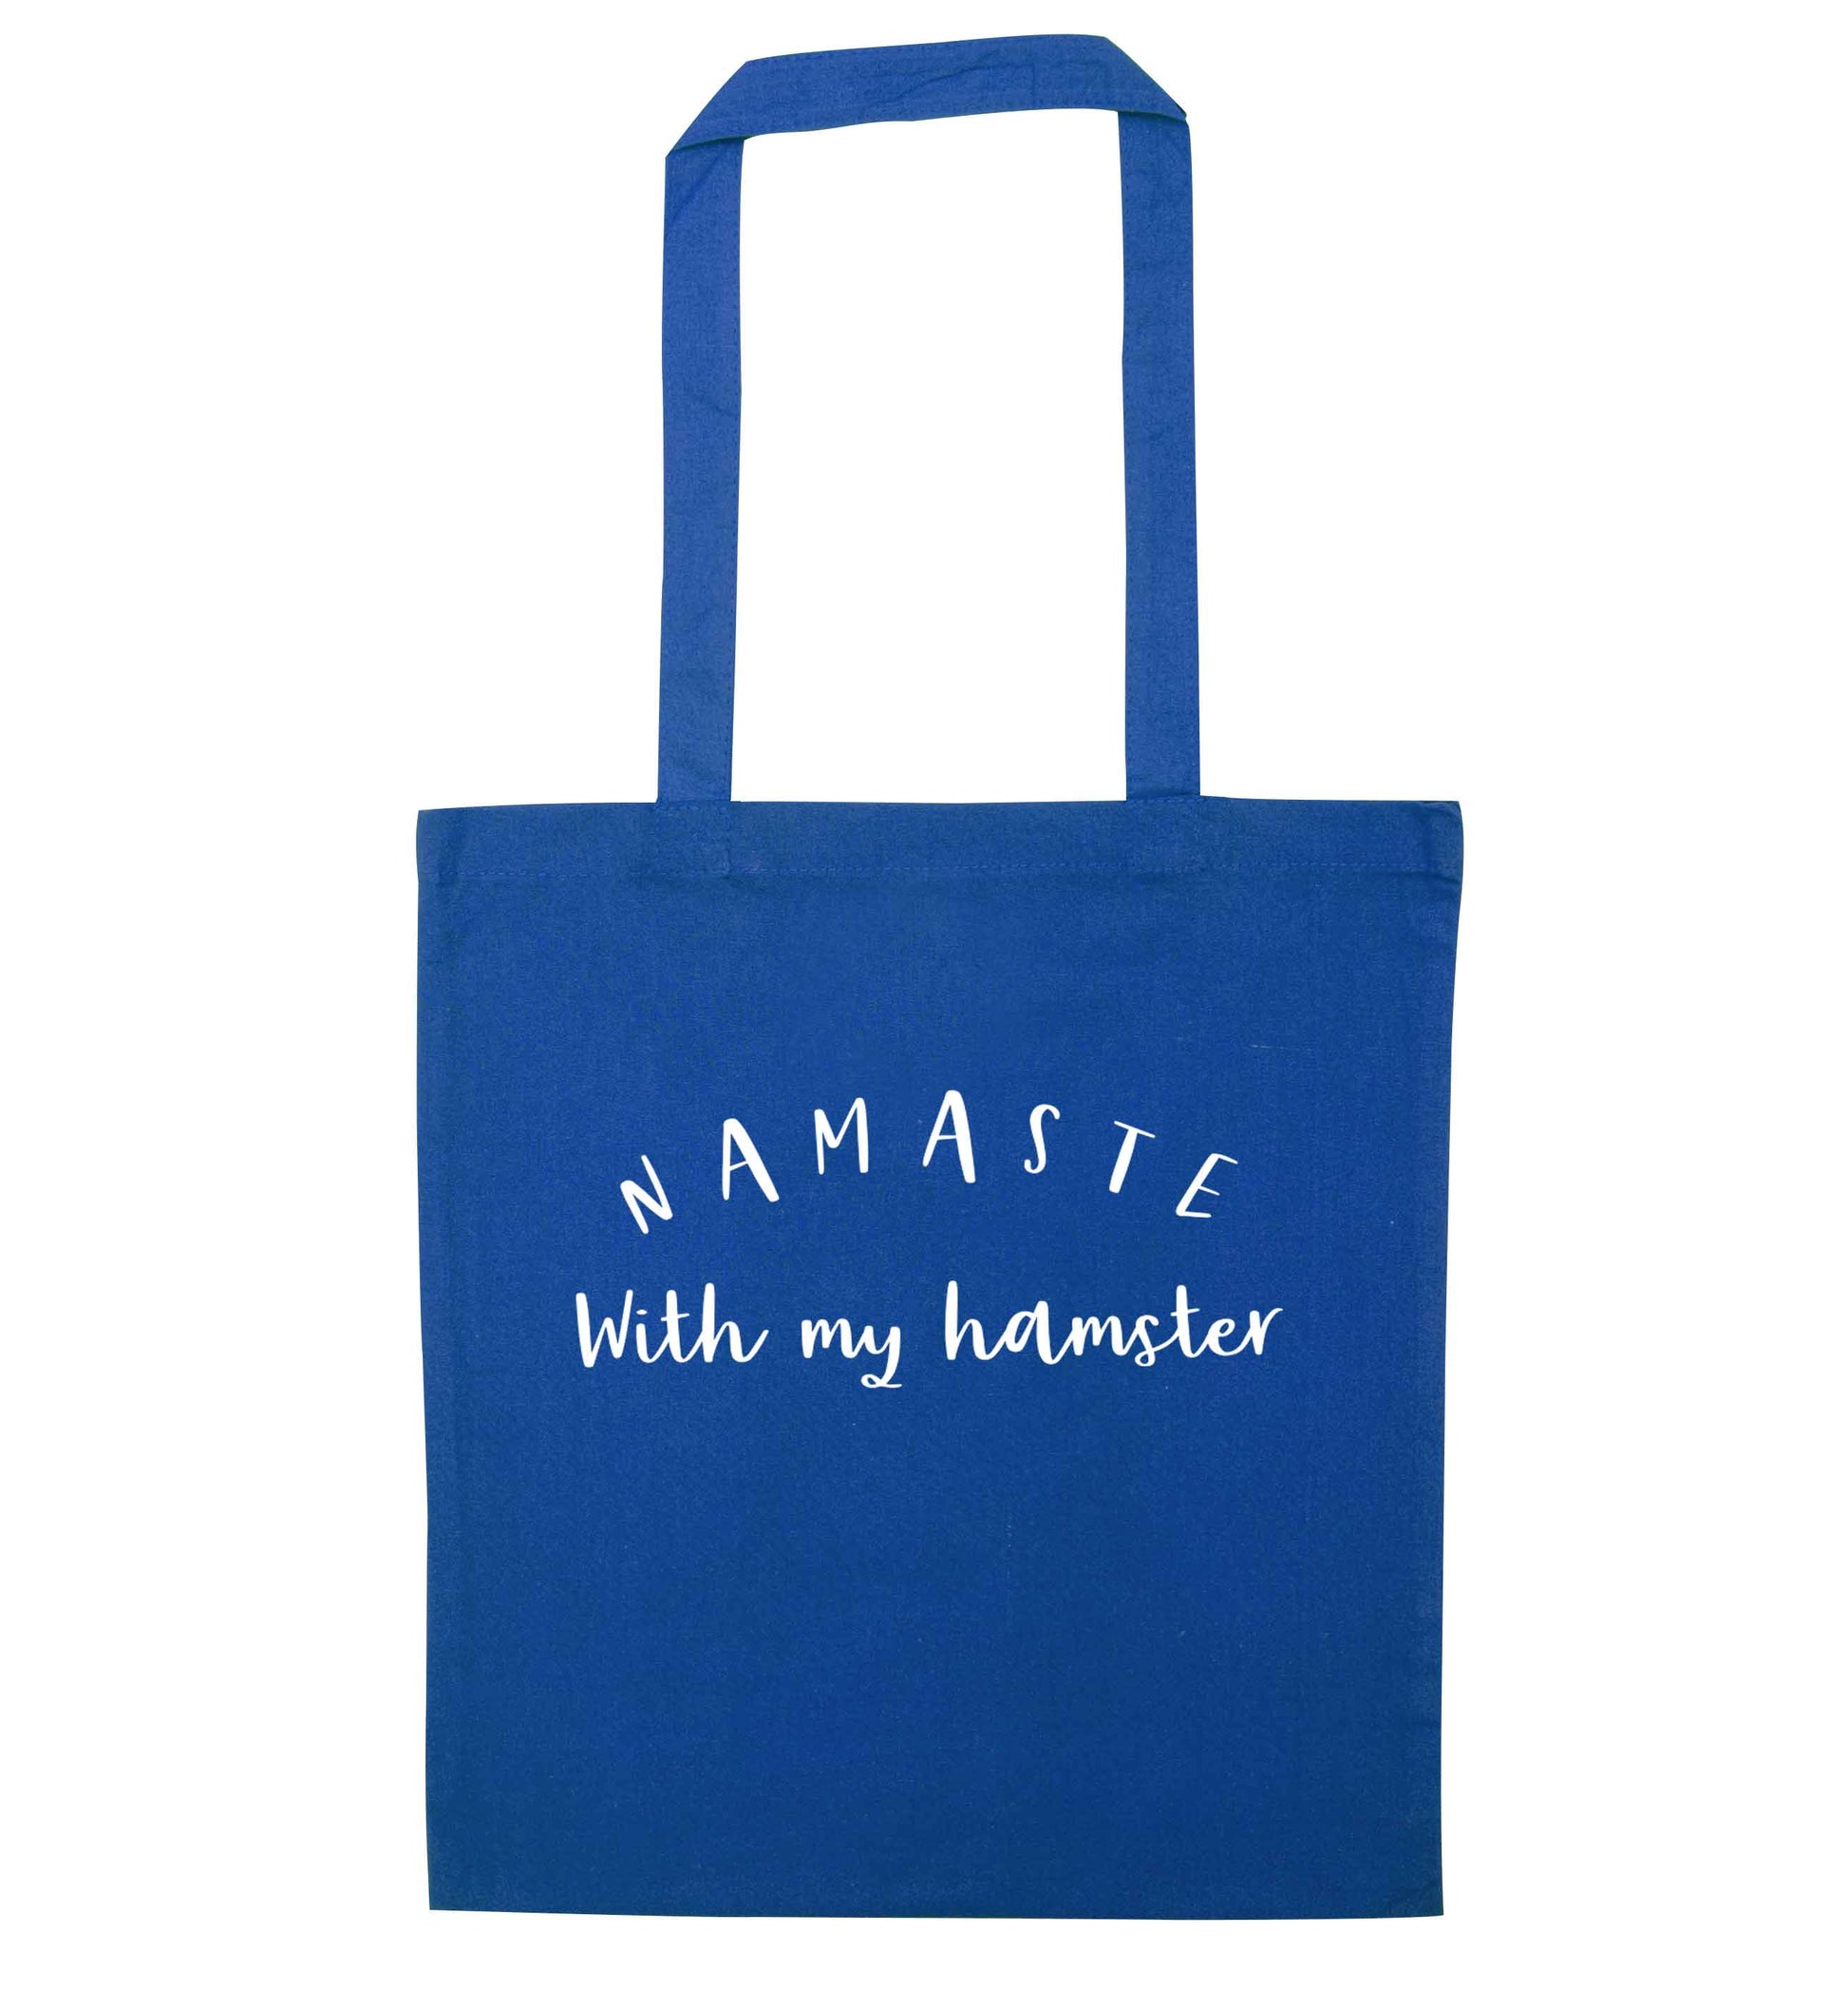 Namaste with my hamster blue tote bag